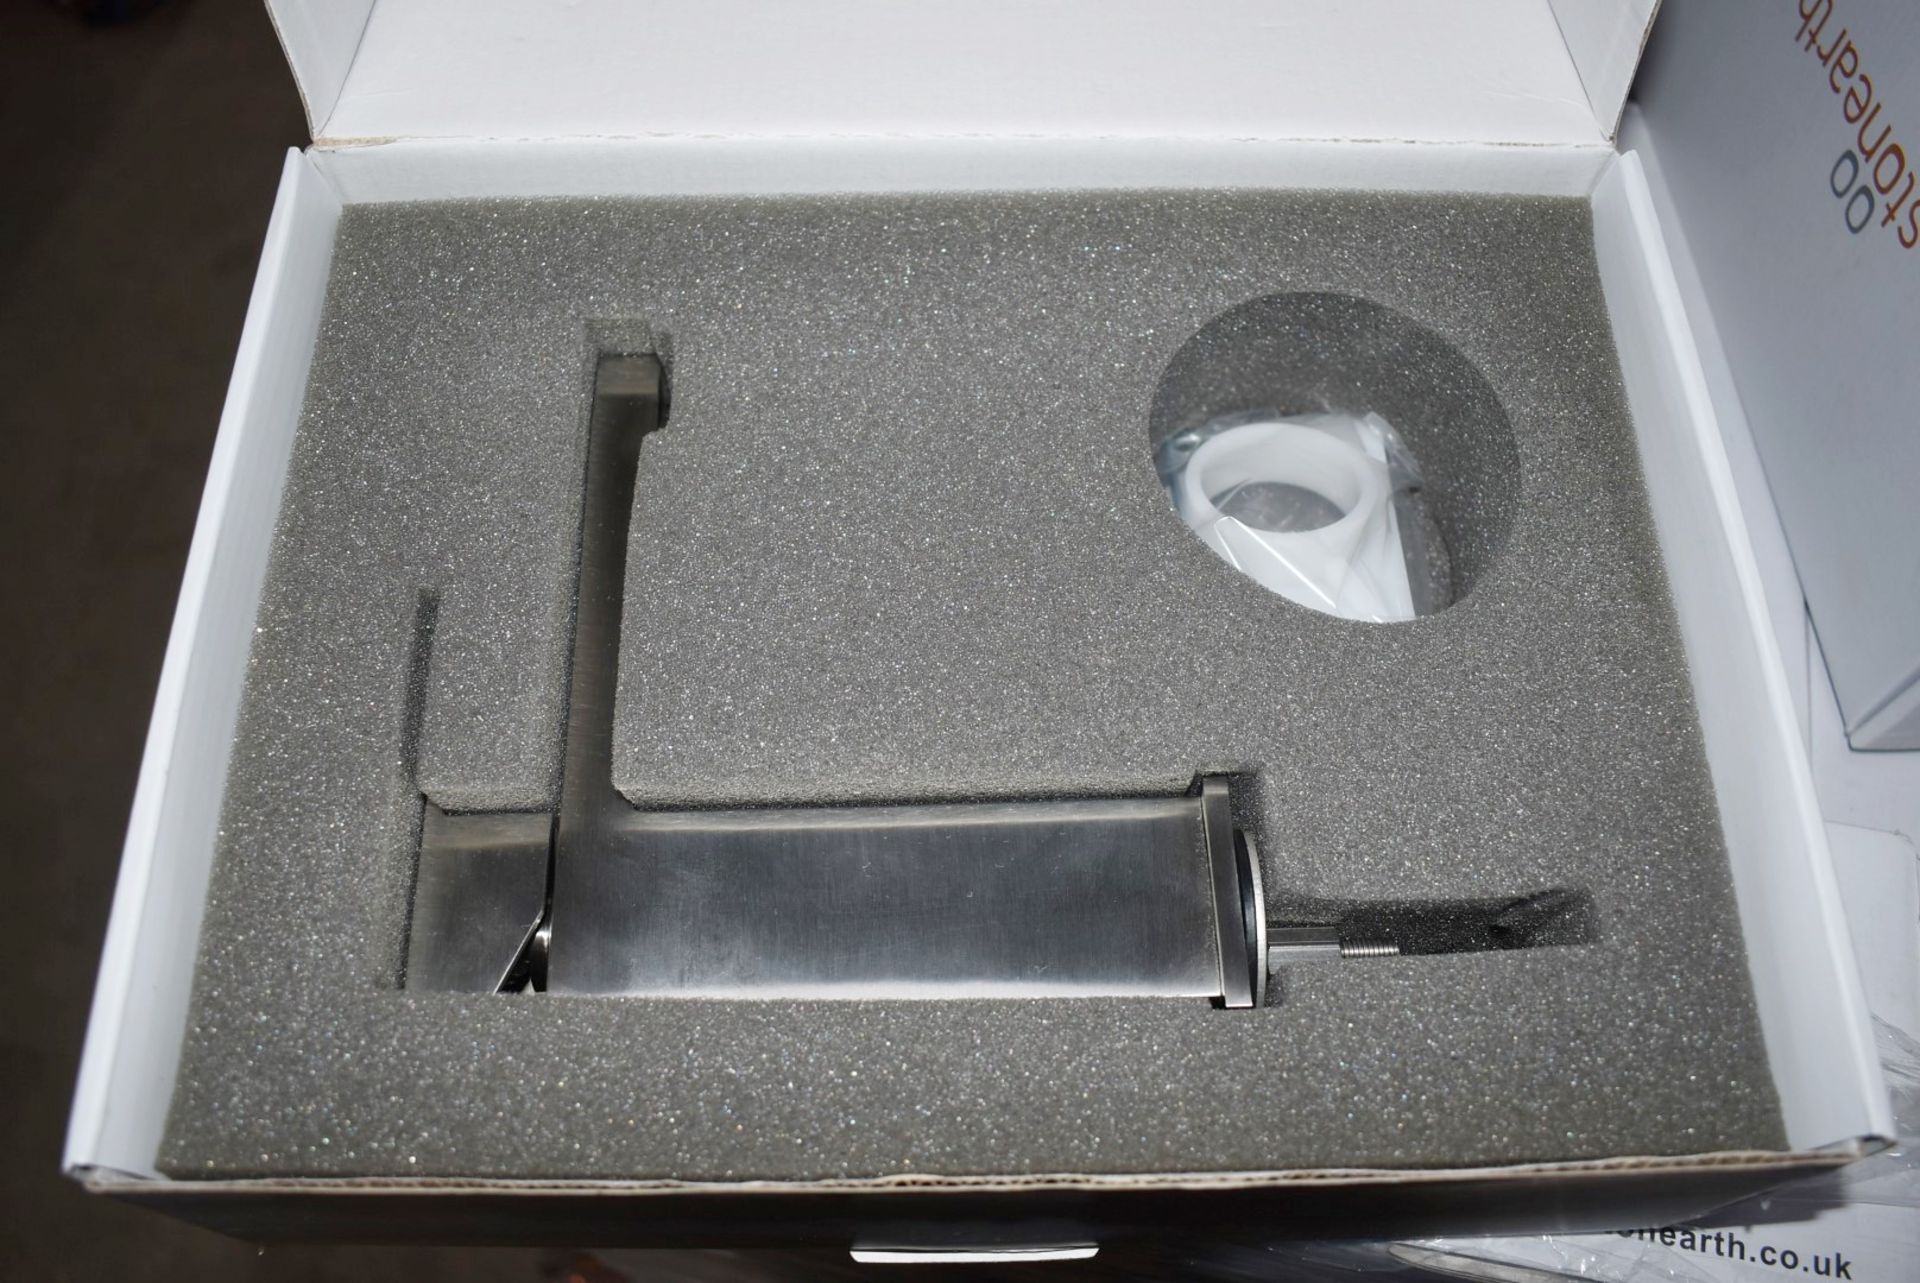 1 x Stonearth 'Metro' Stainless Steel Basin Mixer Tap - Brand New & Boxed - RRP £245 - Ref: TP821 - Image 9 of 13